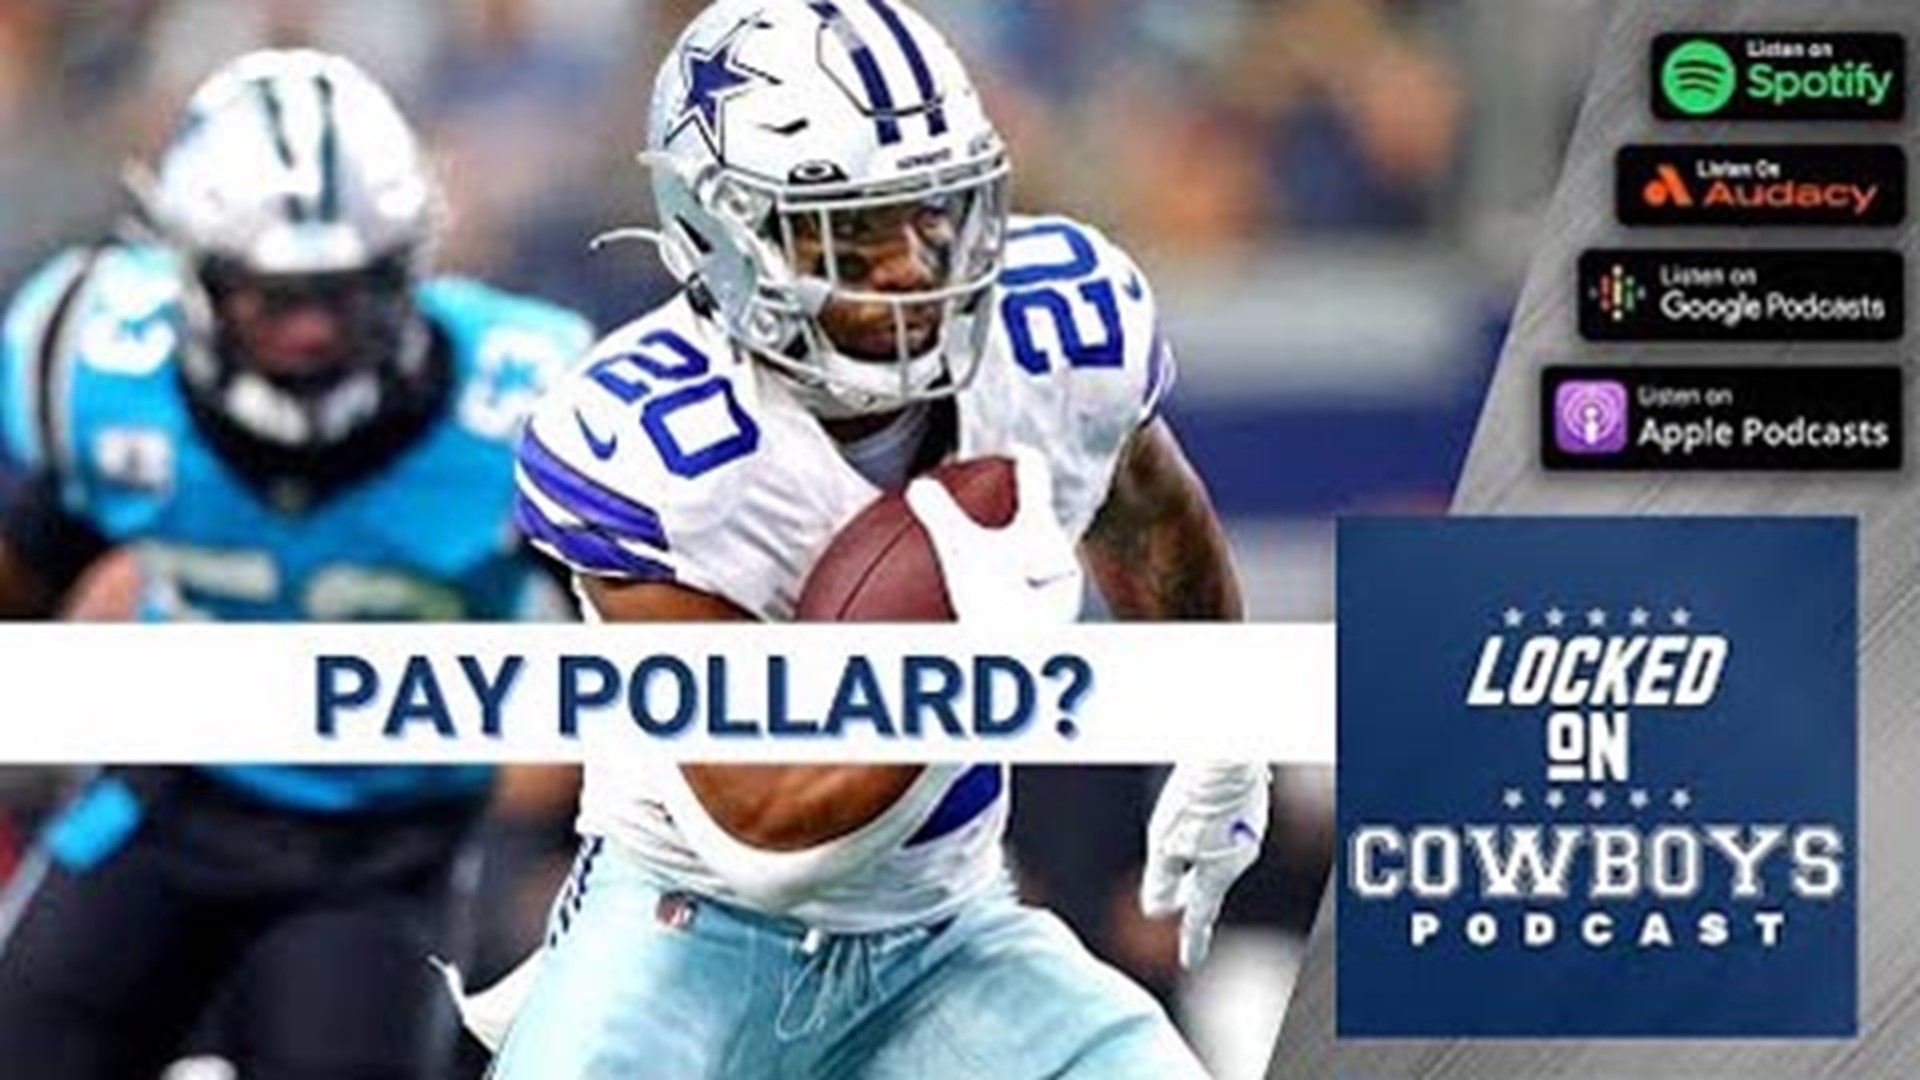 Marcus Mosher and Landon McCool discuss if the Dallas Cowboys should give Tony Pollard a contract extension after this year.